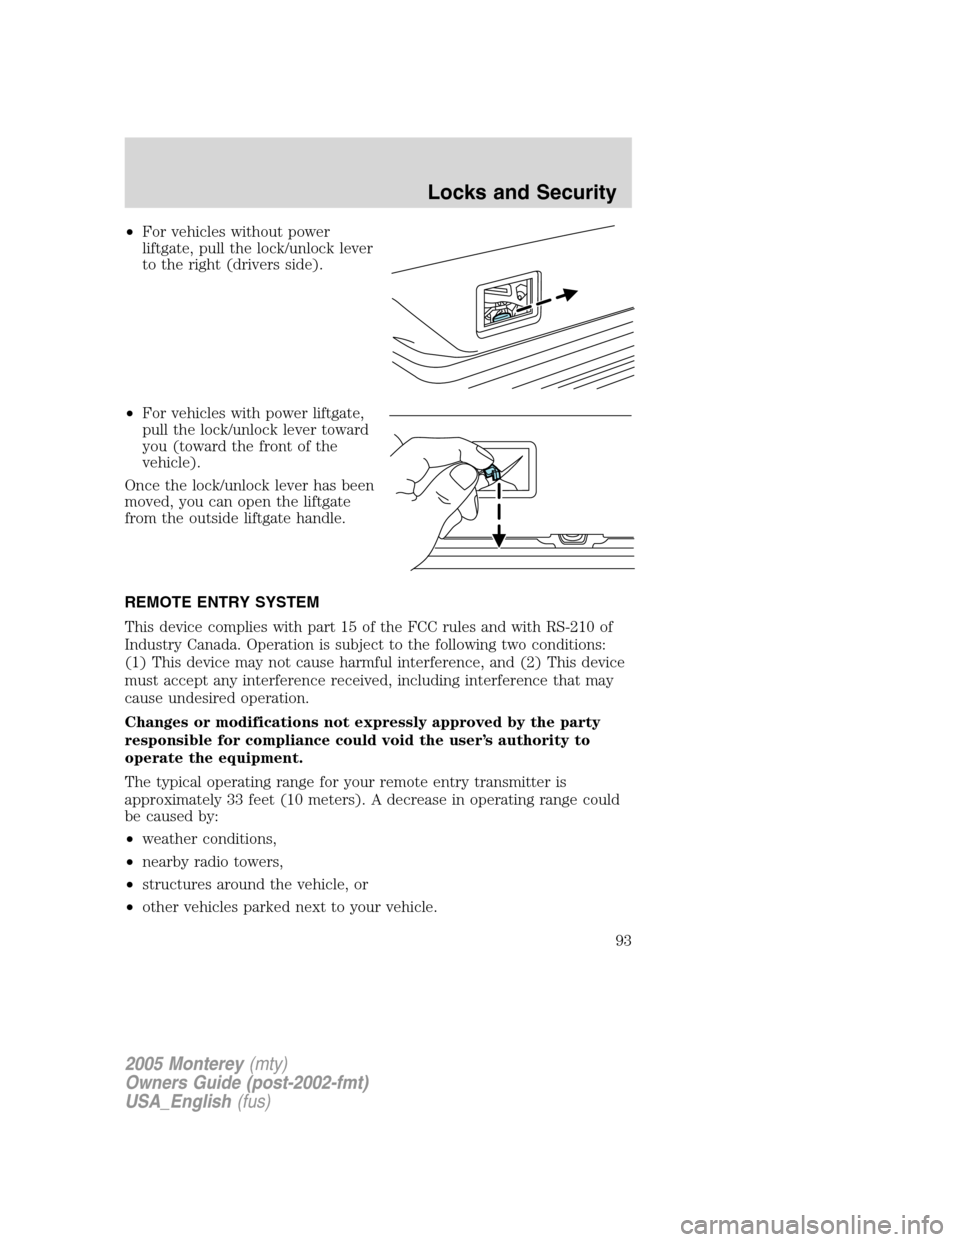 Mercury Monterey 2005  Owners Manuals •For vehicles without power
liftgate, pull the lock/unlock lever
to the right (drivers side).
•For vehicles with power liftgate,
pull the lock/unlock lever toward
you (toward the front of the
vehi